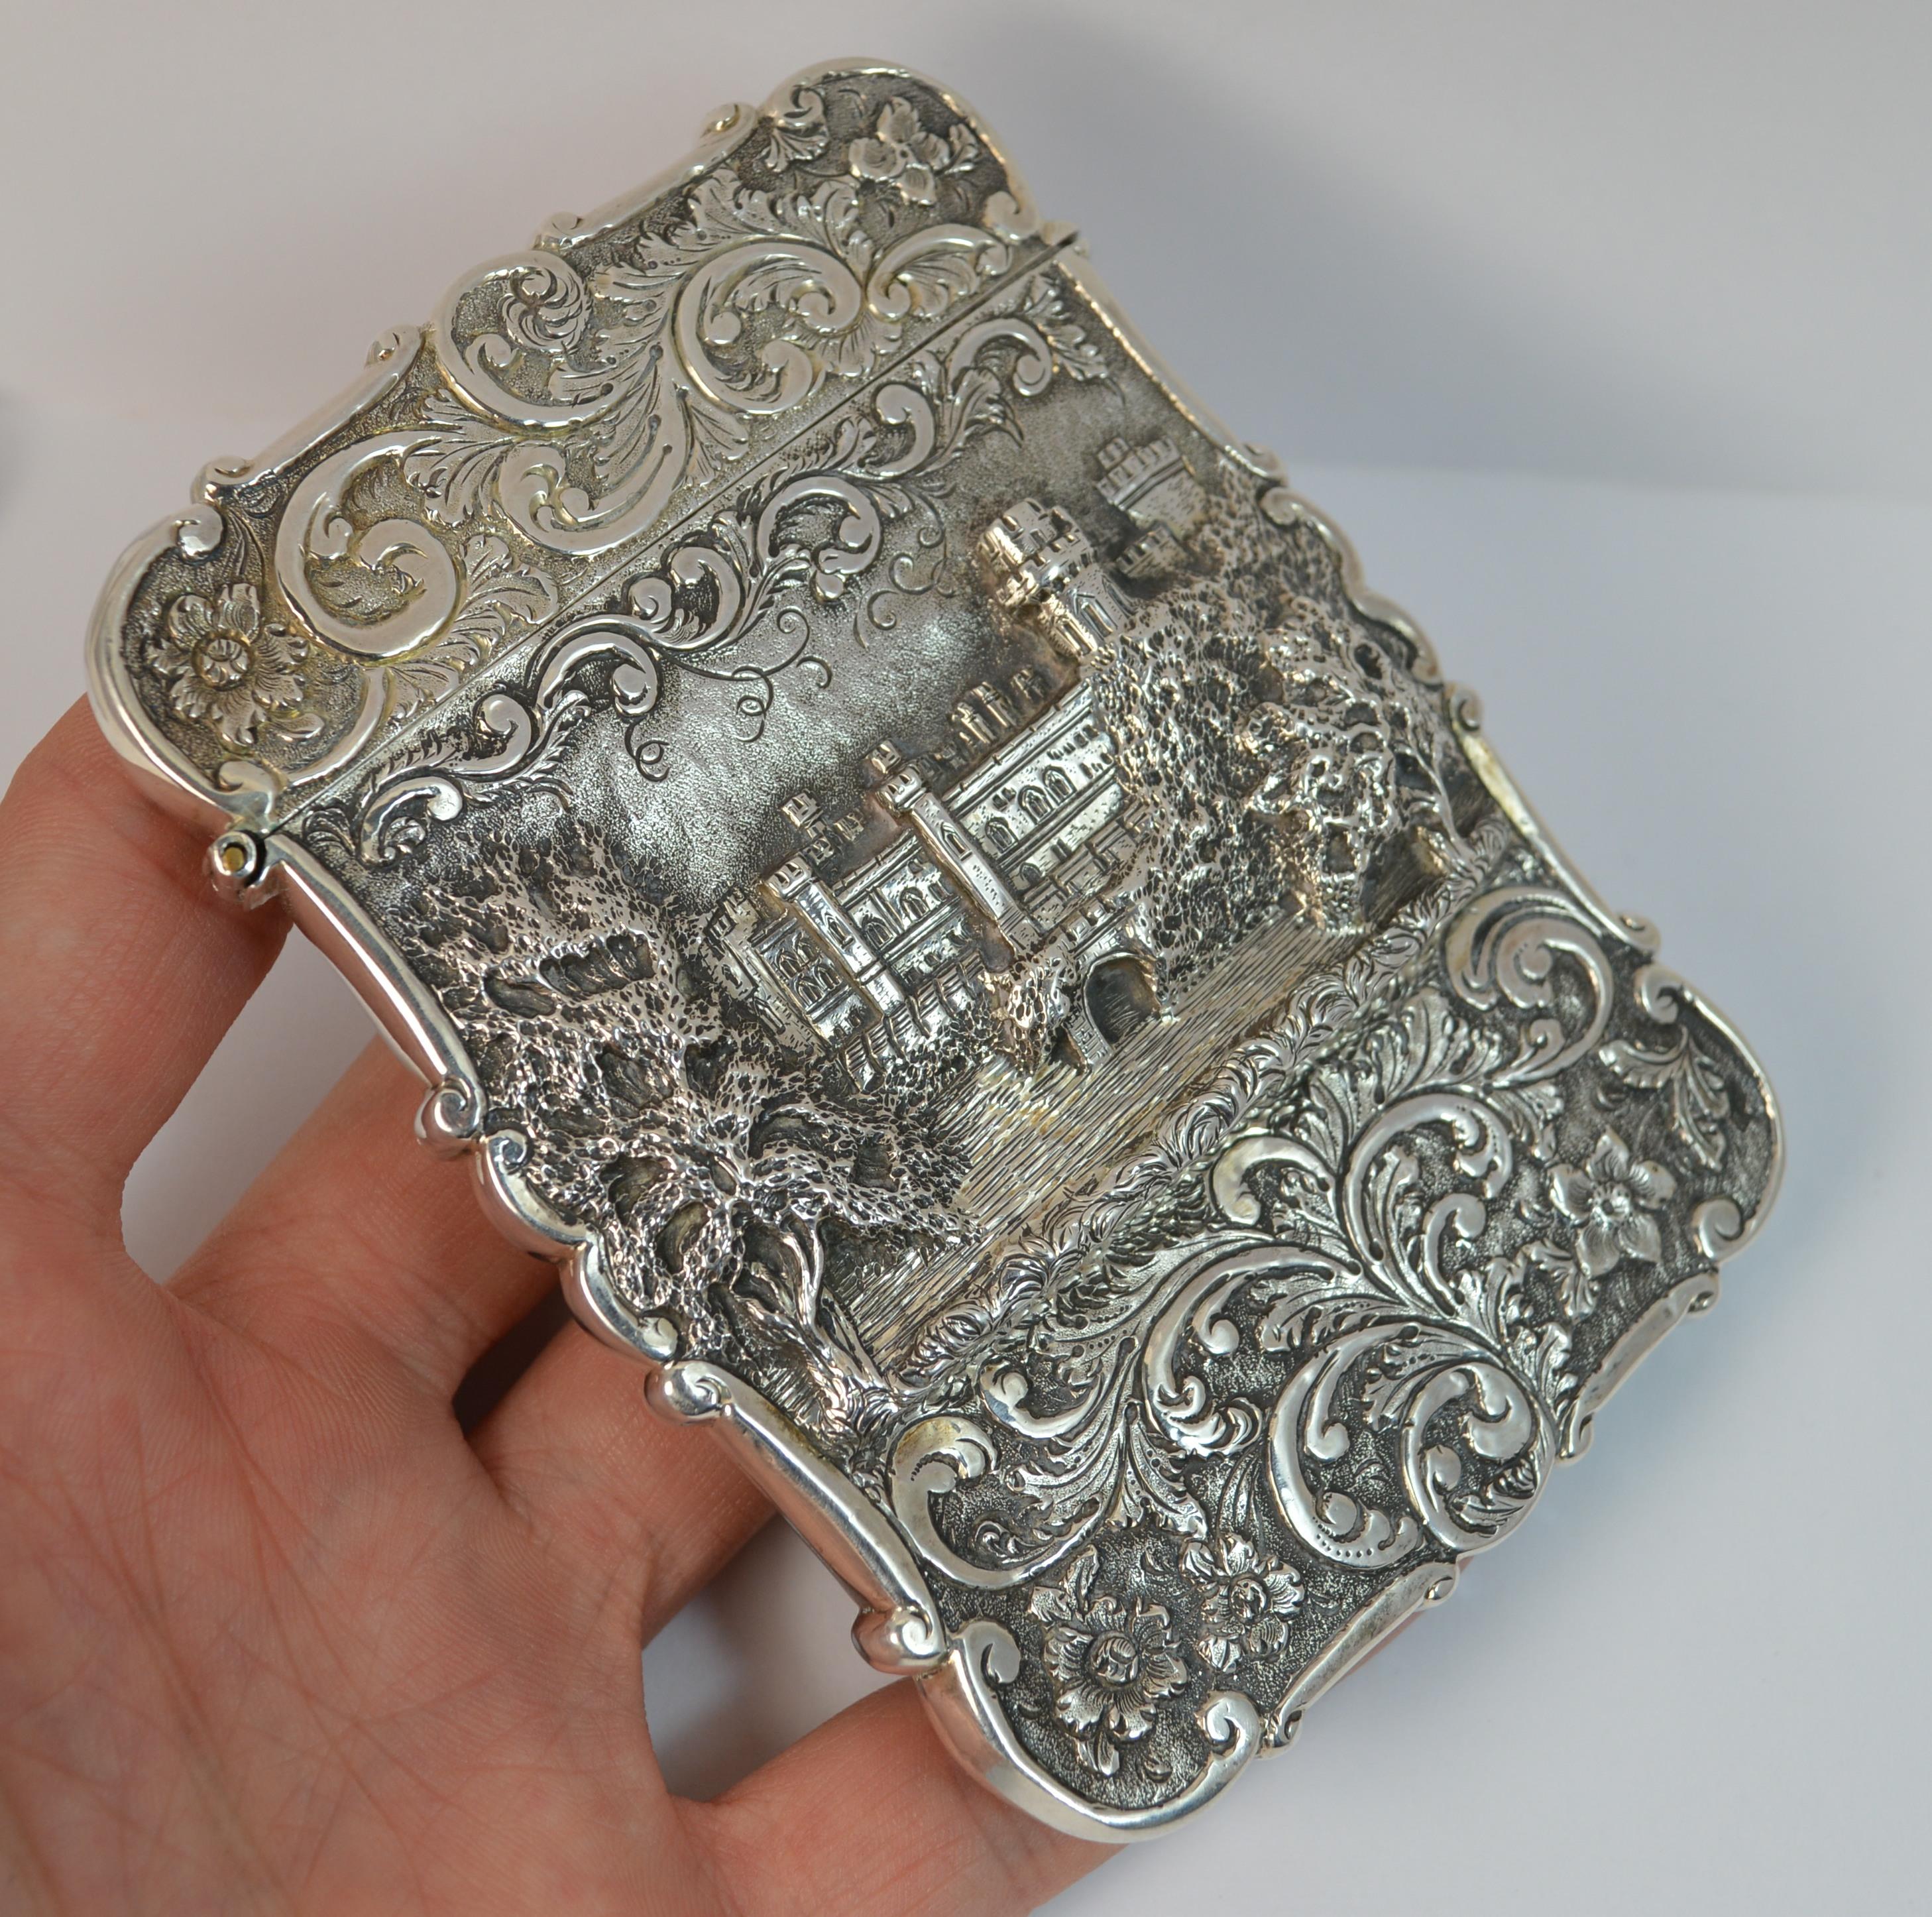 A stunning quality sterling silver card case.

Early Victorian period example by Nathaniel Mills.

The castle top design is of Kenilworth Castle. The castle landscape spreads the width of the case and a deep floral engraved finish runs throughout